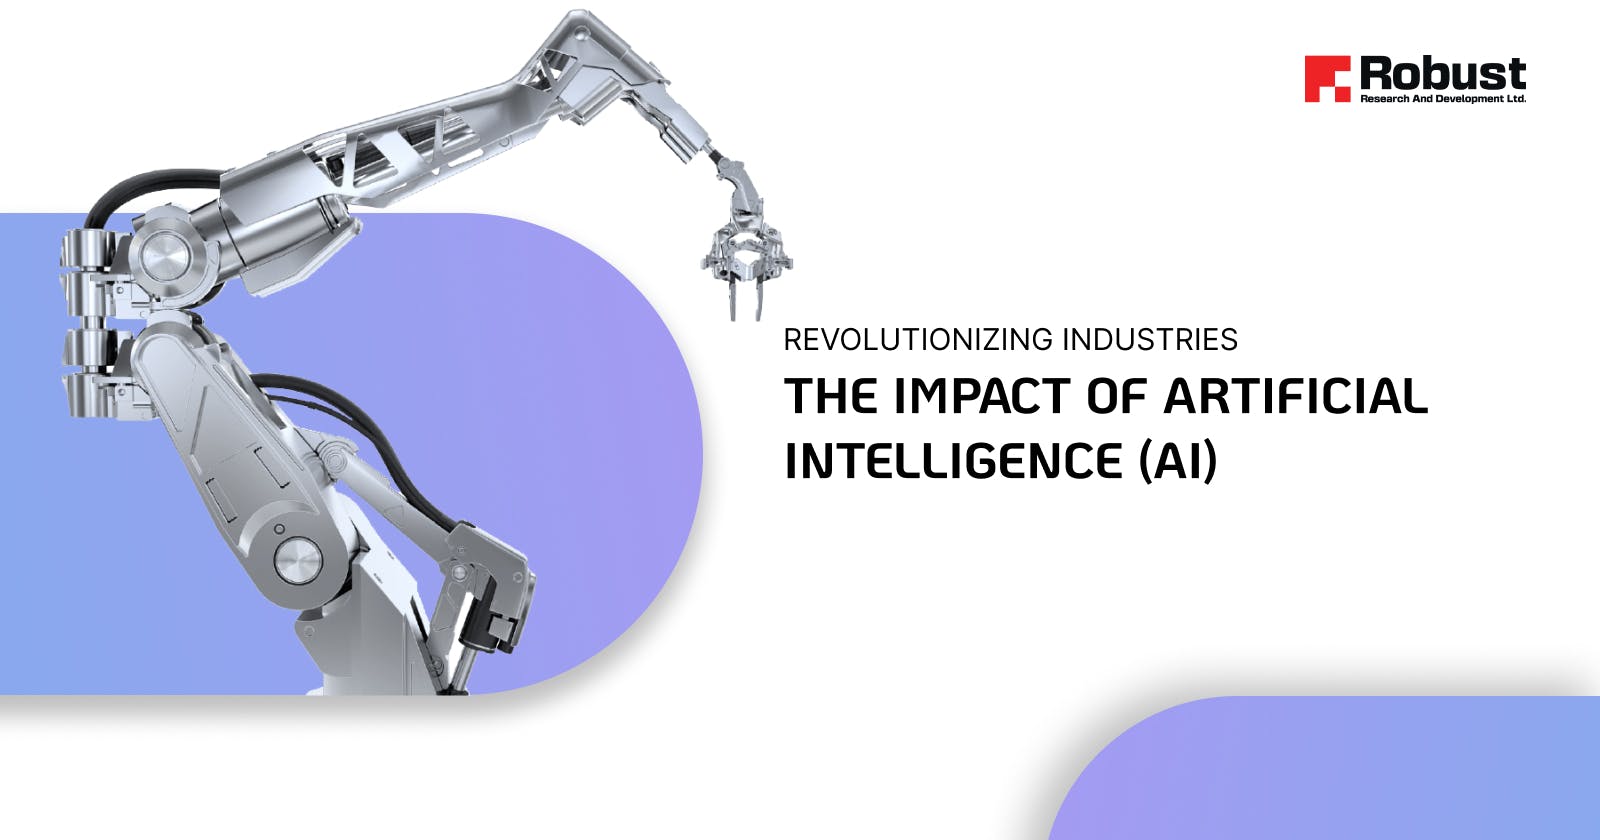 Revolutionizing Industries: The Impact of Artificial Intelligence (AI)